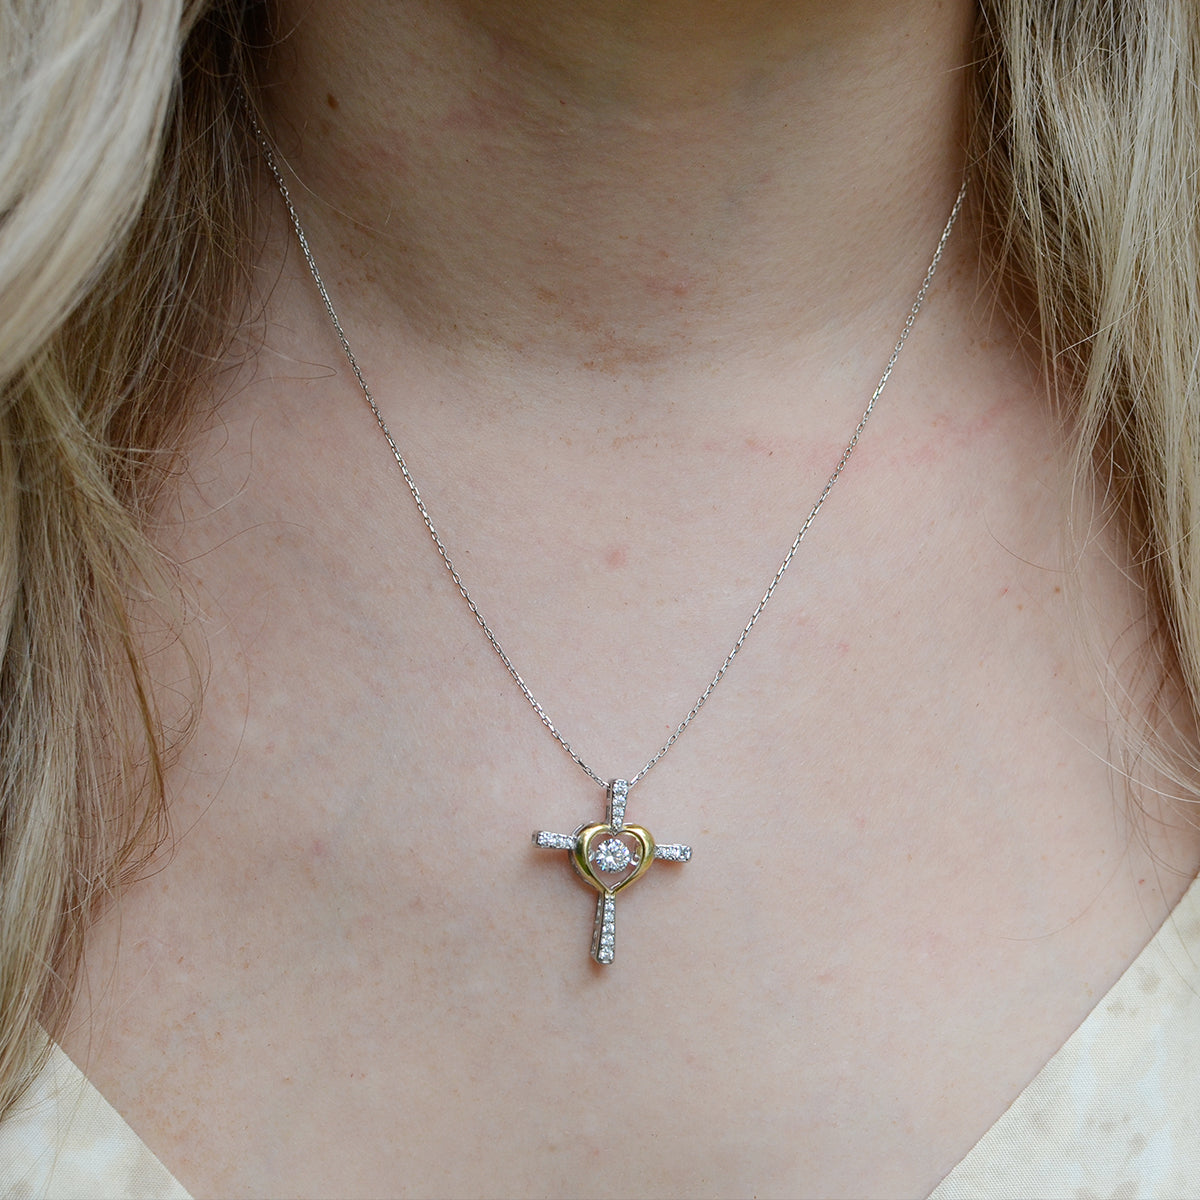 New Cross Pendants Coming Soon! This beauty will also be available in  turquoise & onyx. #RRP017, … | Silver necklace designs, Country jewelry,  Silver heart necklace